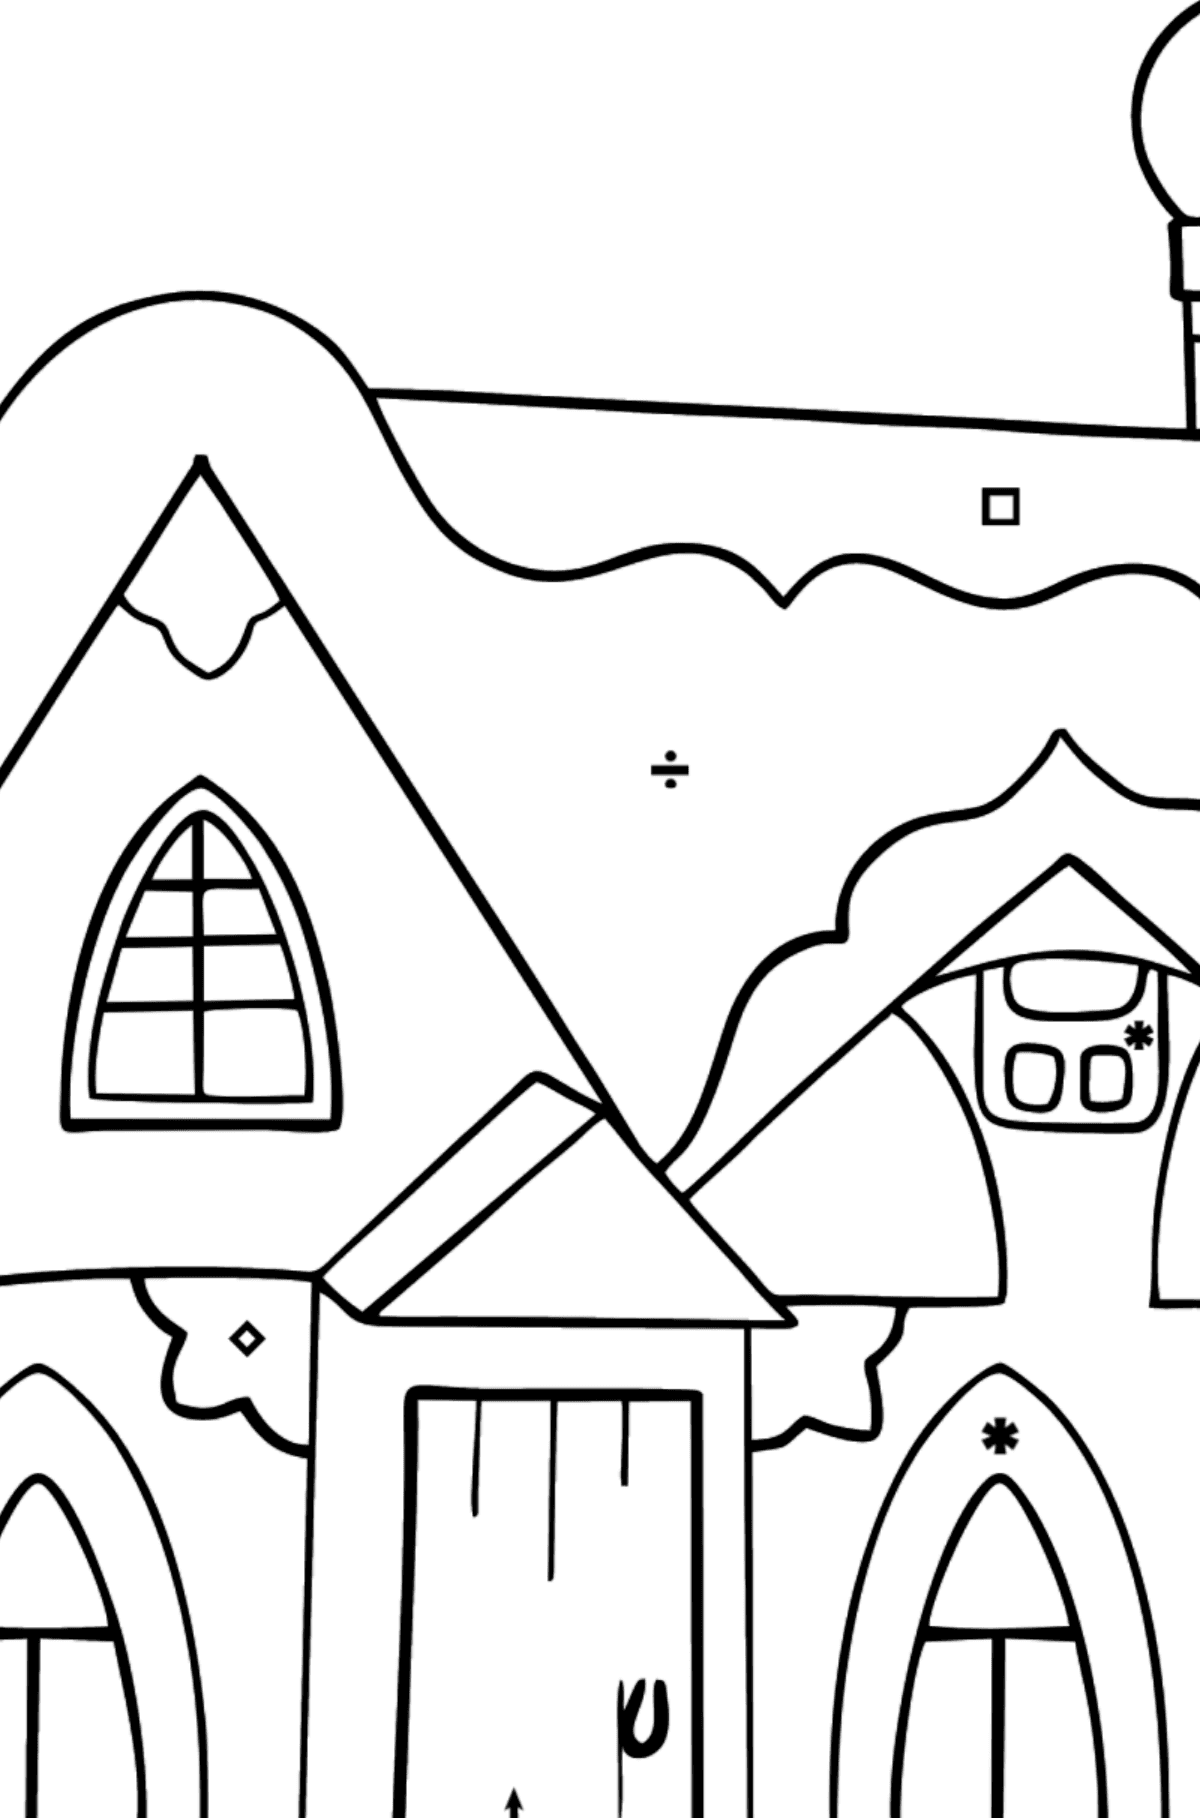 Simple Coloring Page - A Fairytale House - Coloring by Symbols for Kids